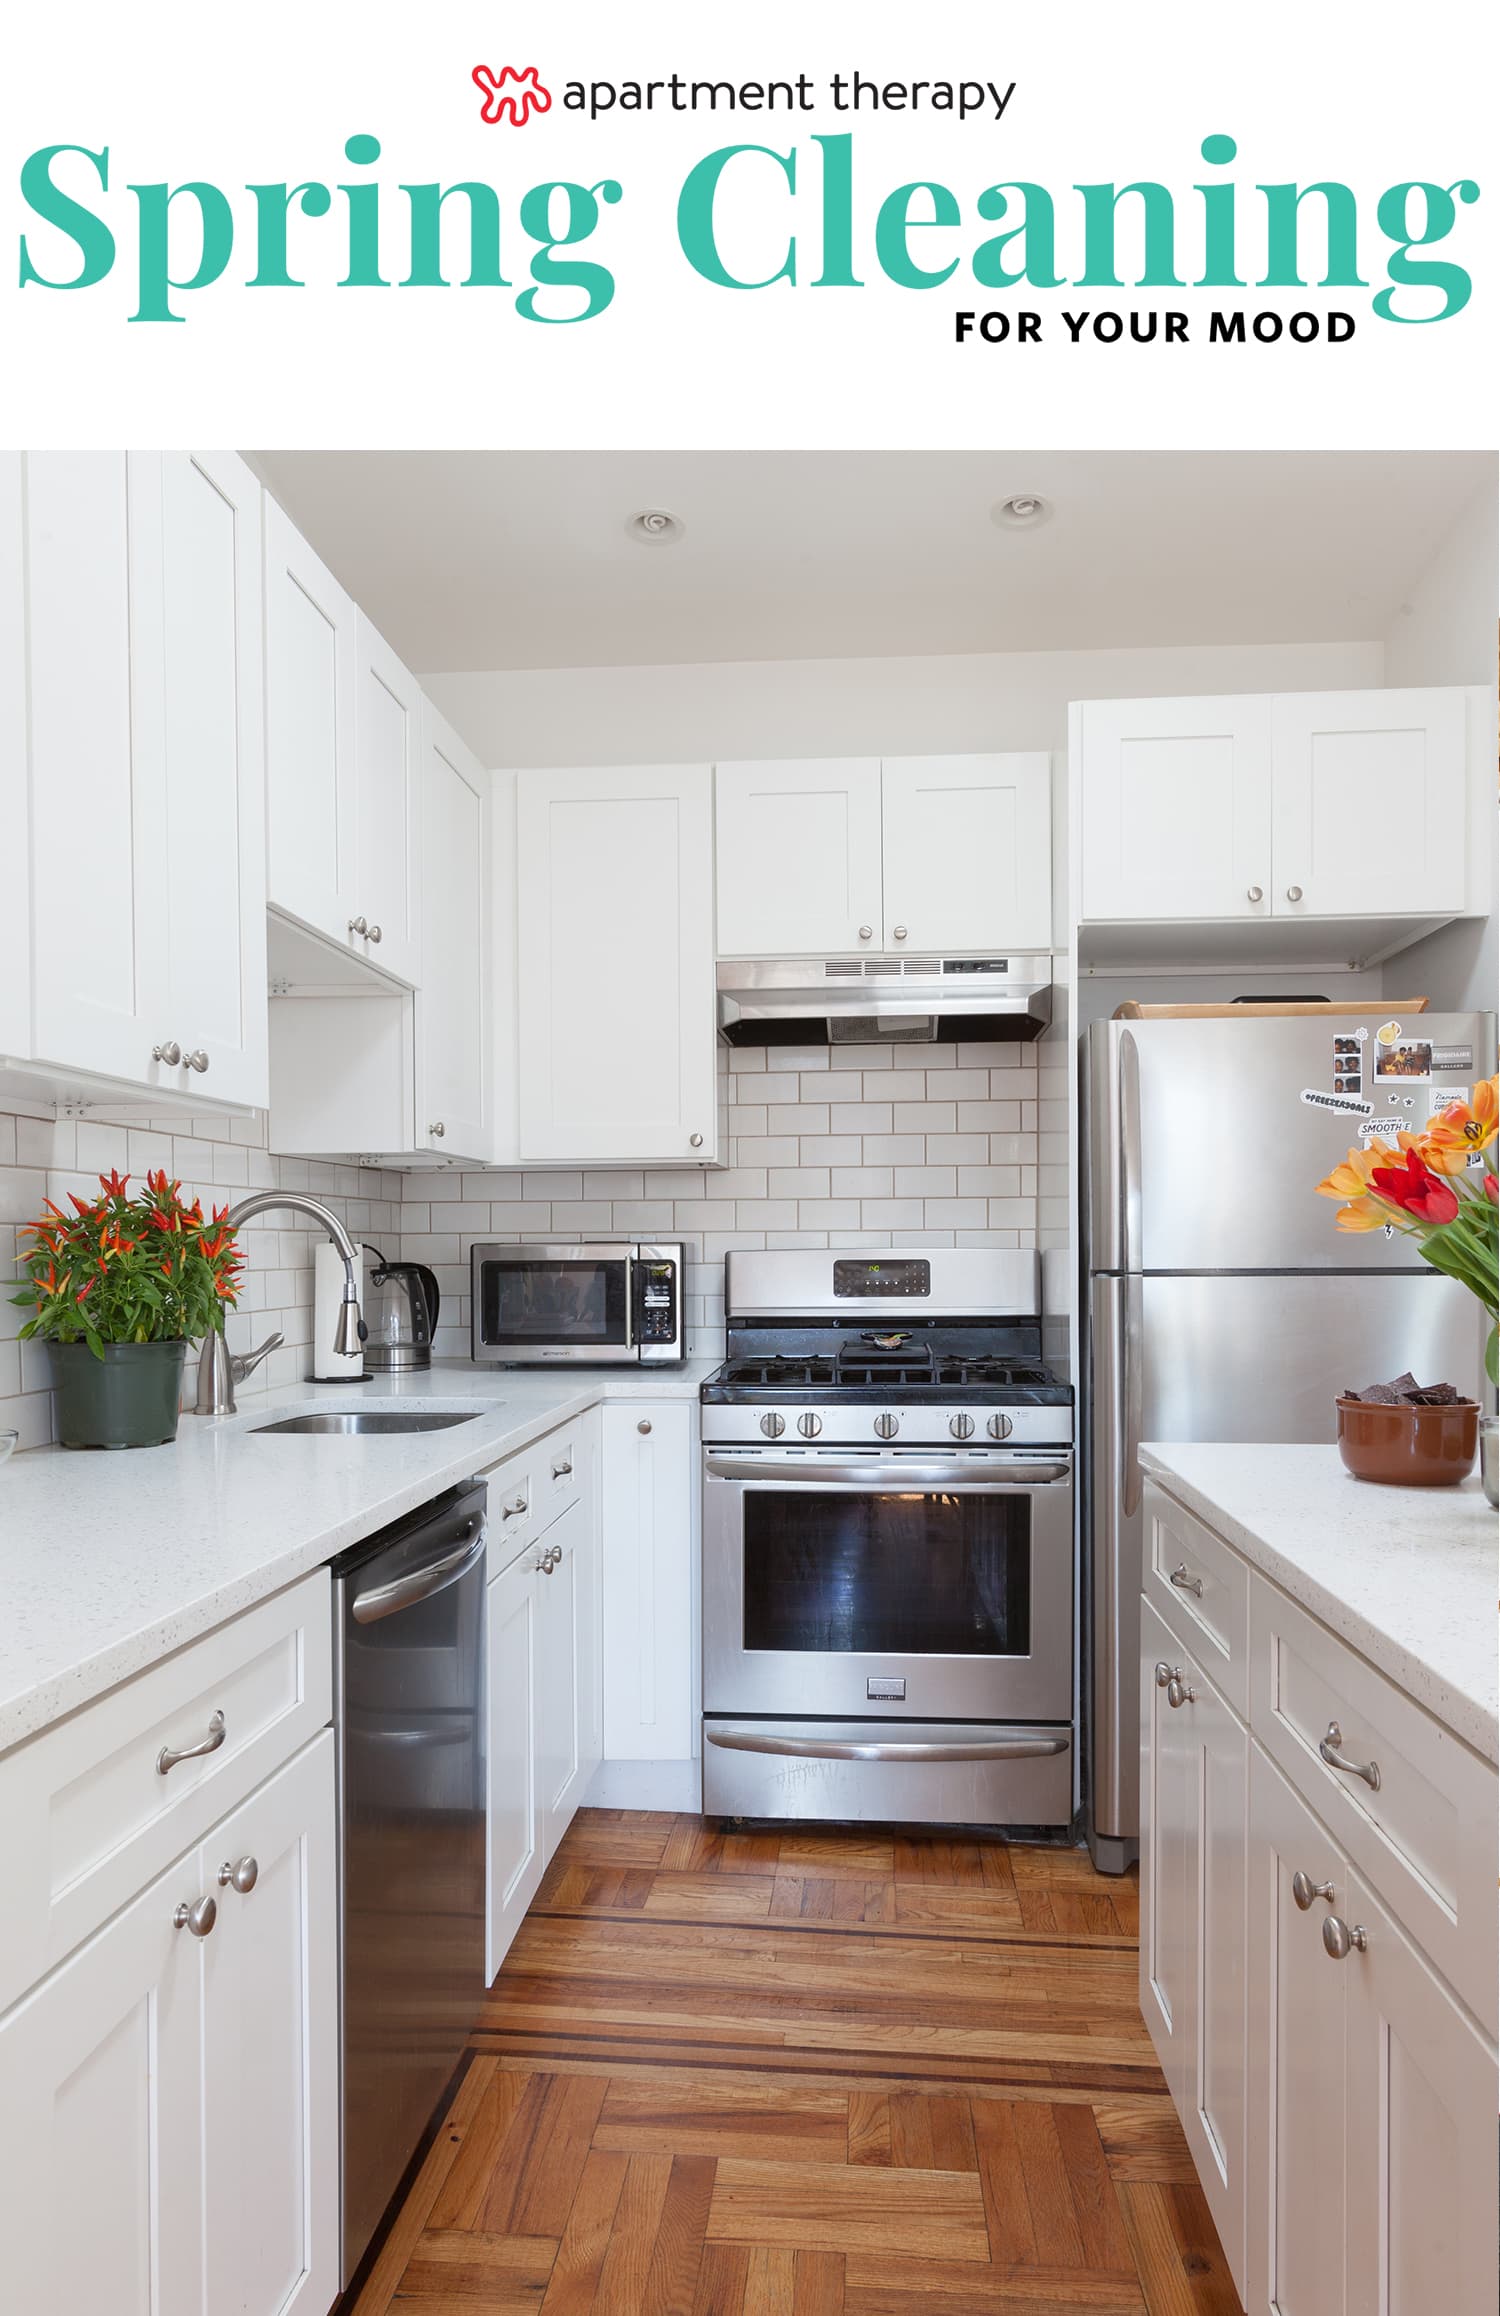 How to Care for and Maintain Your New Kitchen Appliances - NewHomeSource